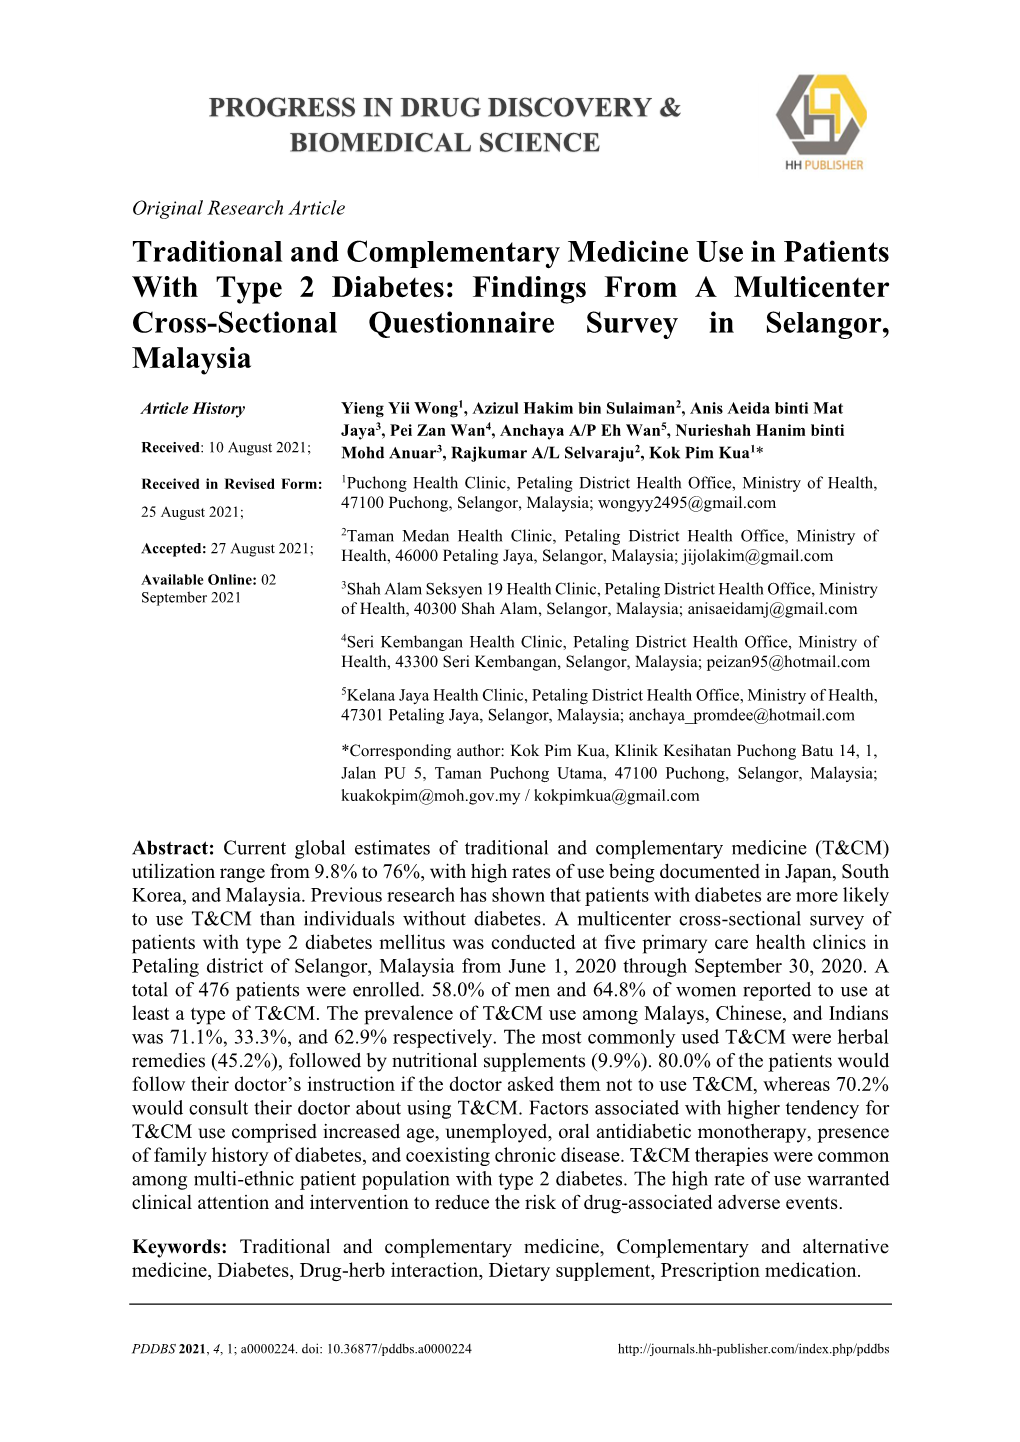 Traditional and Complementary Medicine Use in Patients with Type 2 Diabetes: Findings from a Multicenter Cross-Sectional Questionnaire Survey in Selangor, Malaysia